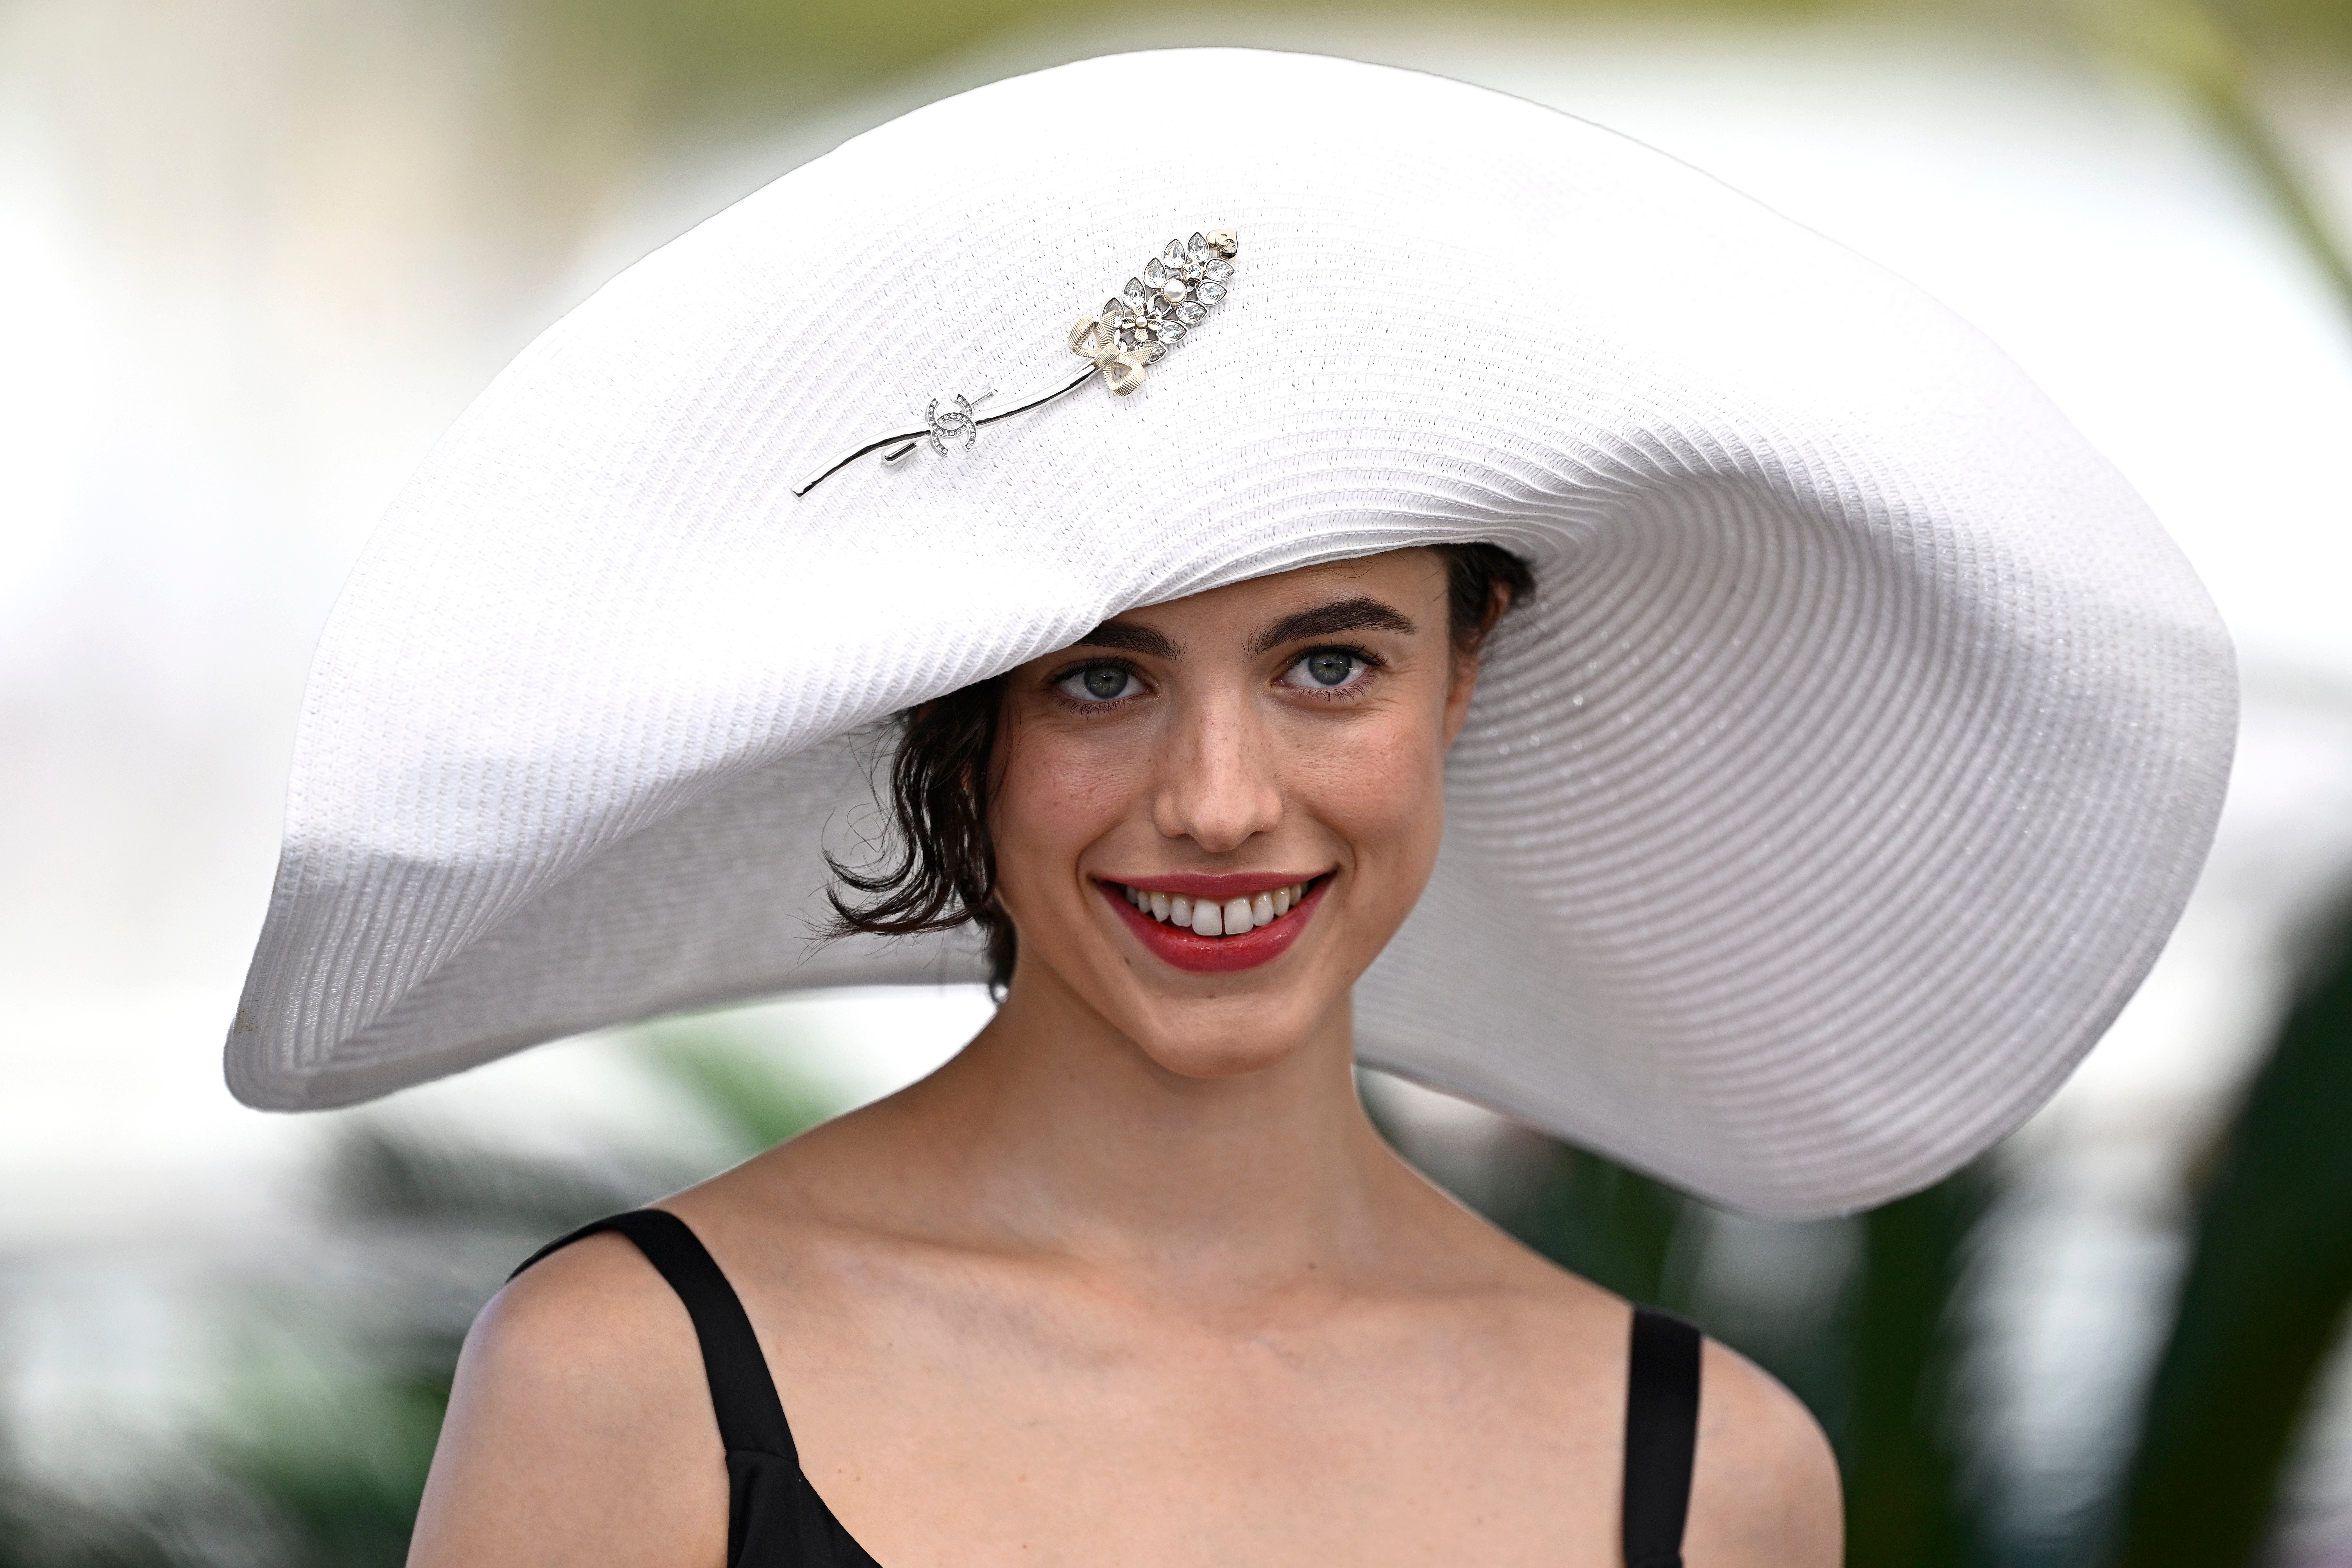 Fans believe Margaret Qualley paid homage to her mom with floppy hat